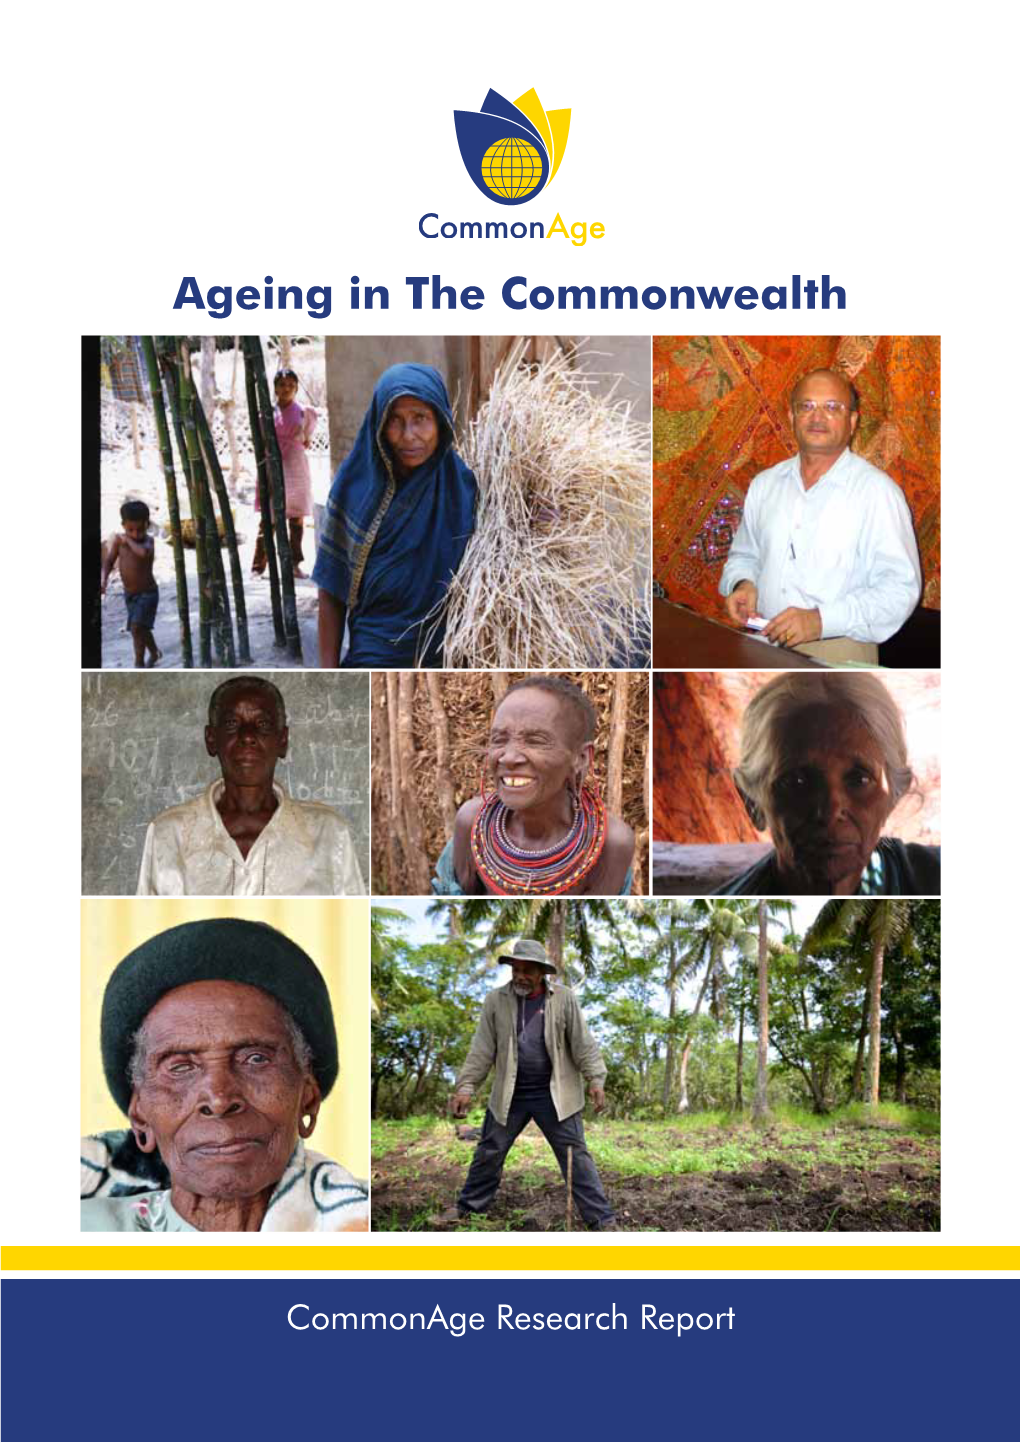 Ageing in the Commonwealth” and Has Been Timed to Be Presented at the 2018 Commonwealth Summit